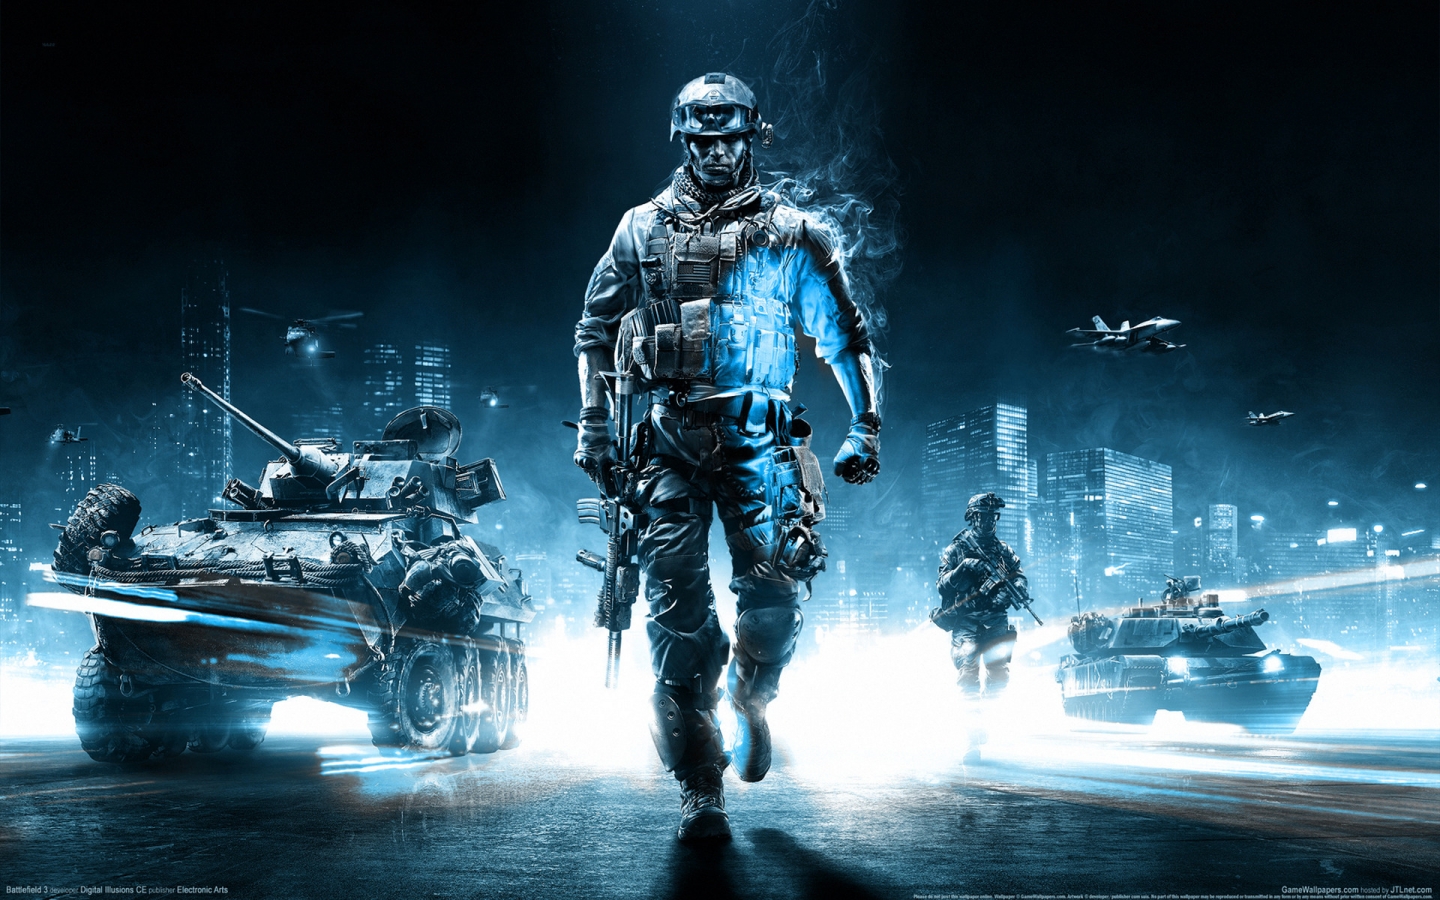 Battlefield 3 Action Game for 1440 x 900 widescreen resolution